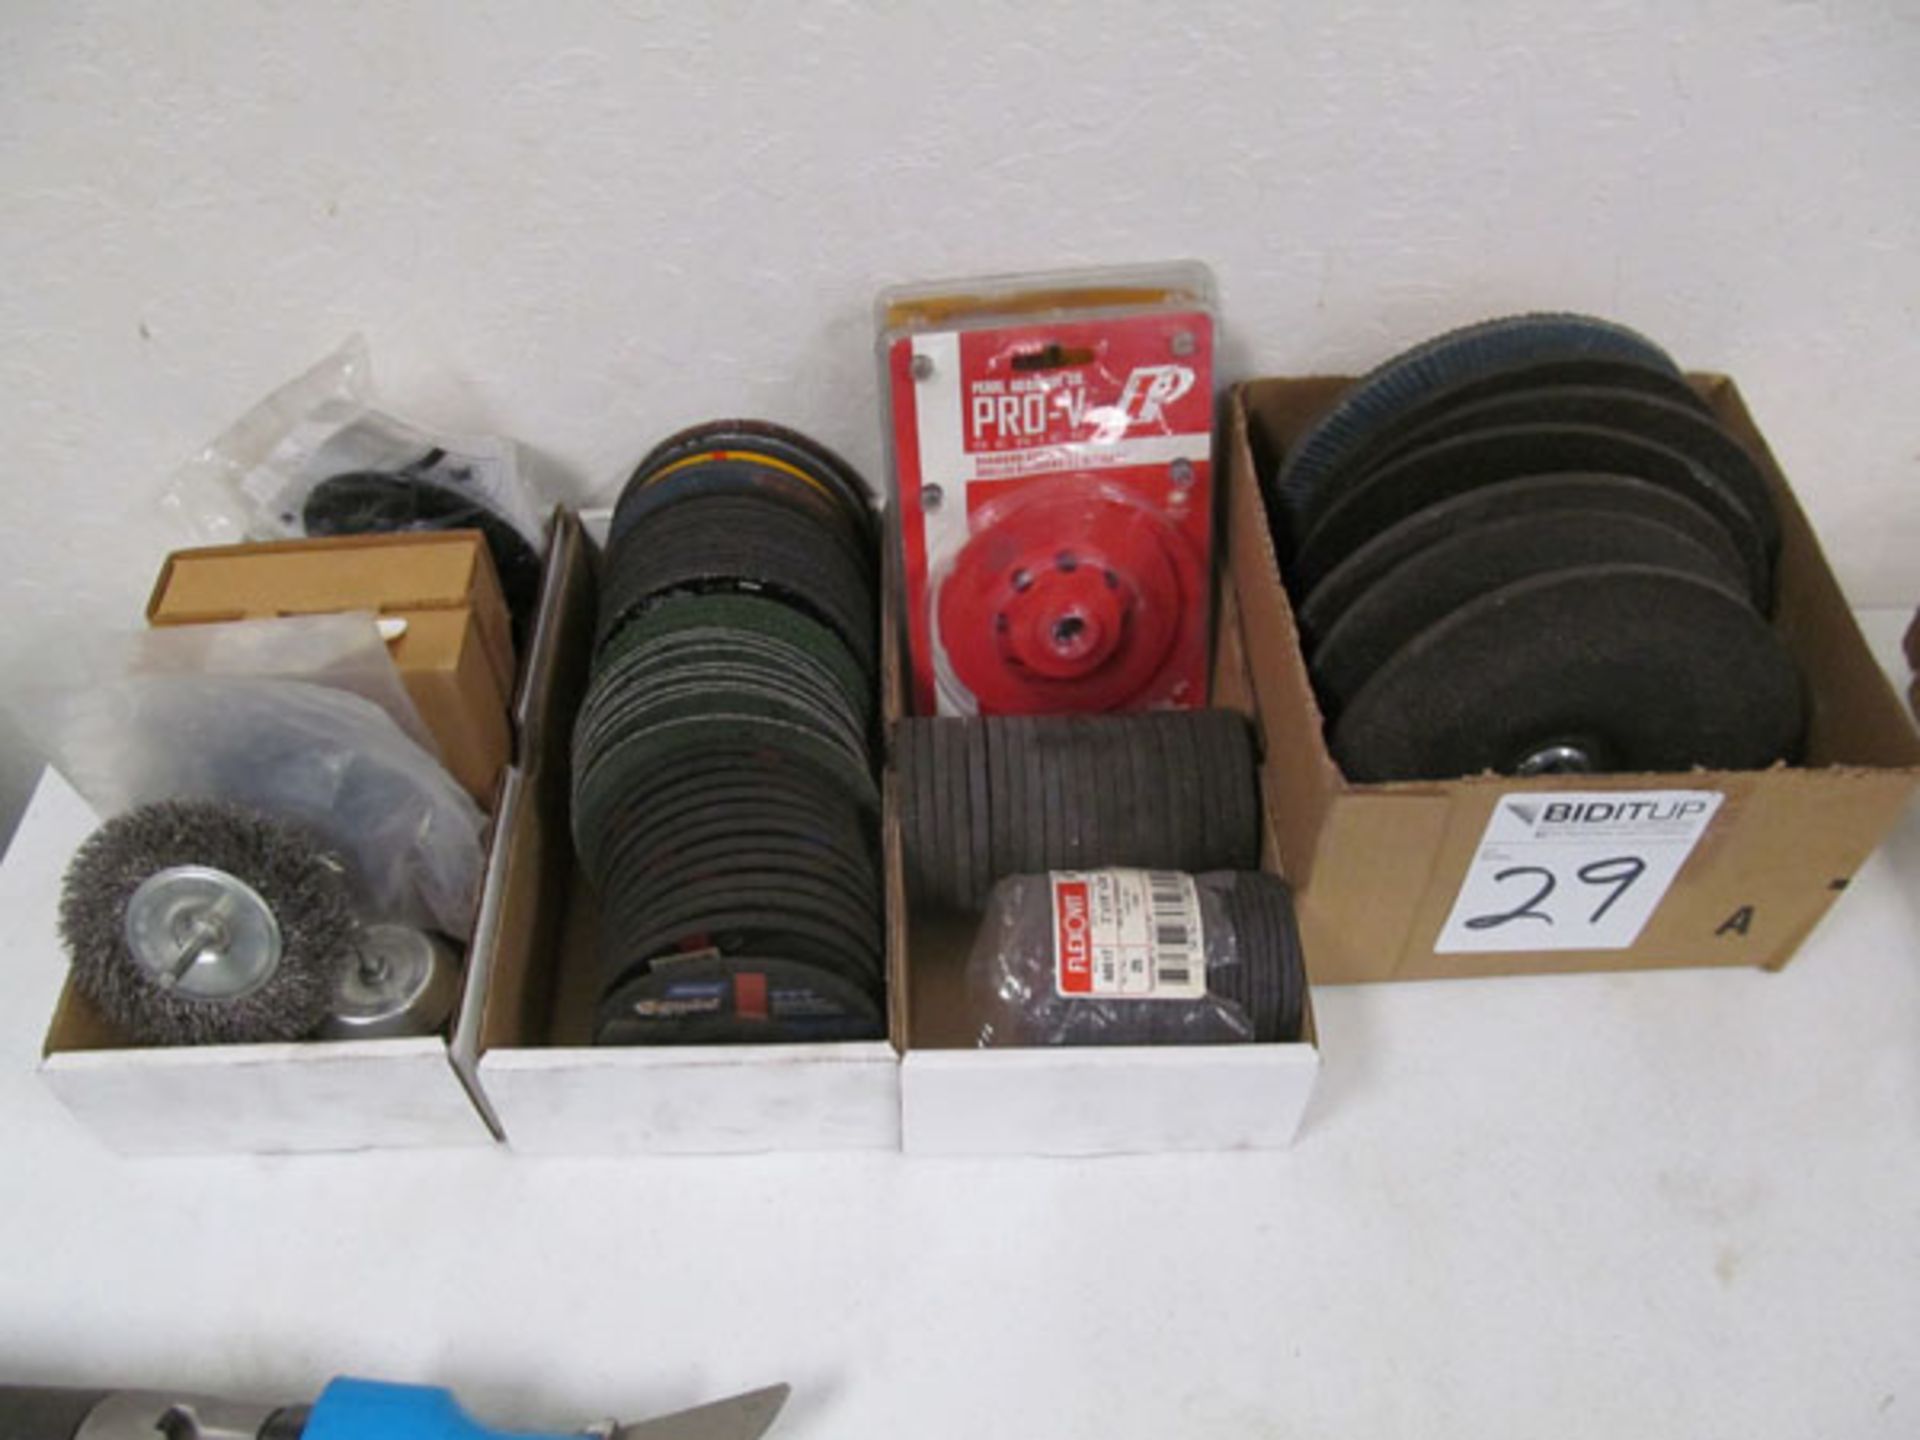 Lot of Assorted Grinding Disc